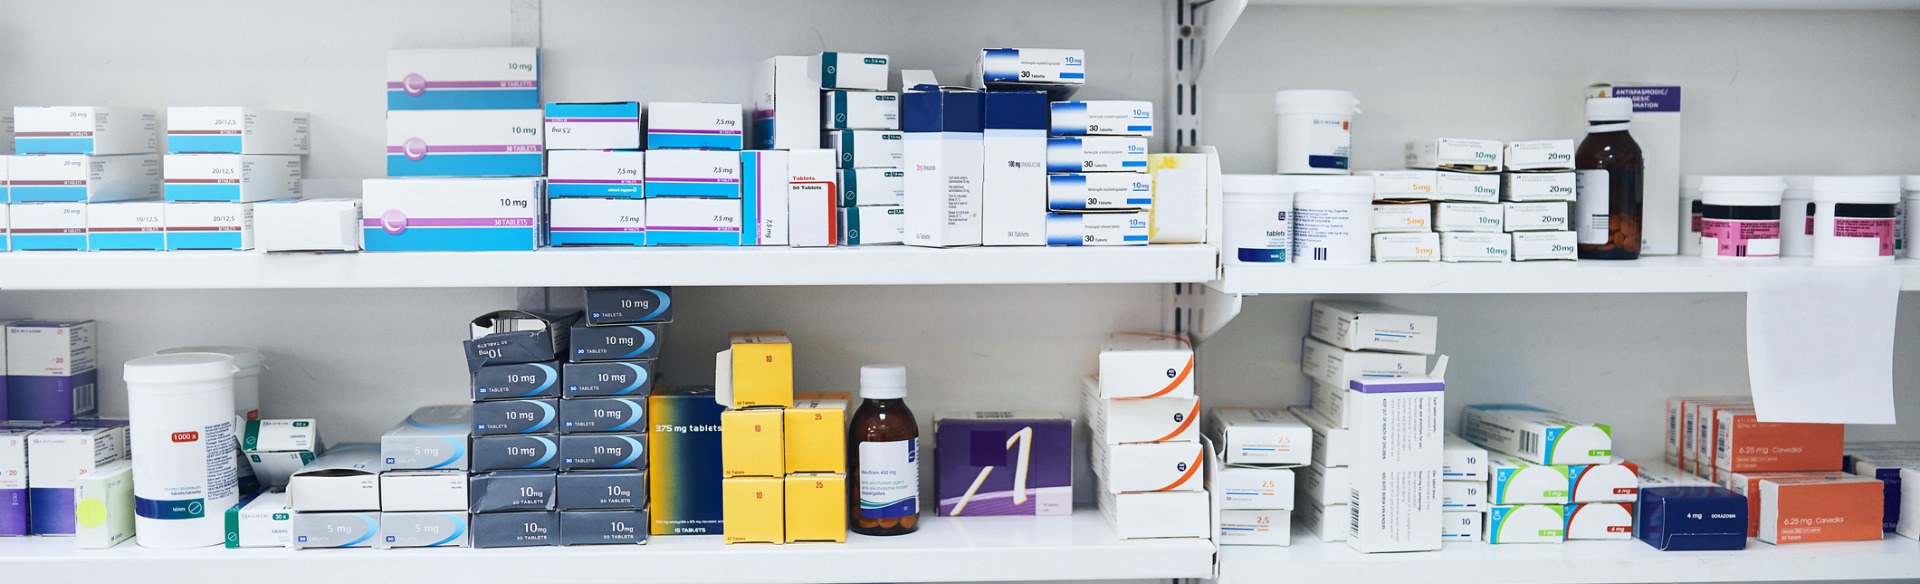 pharmacy shelf with various medications and prescriptions